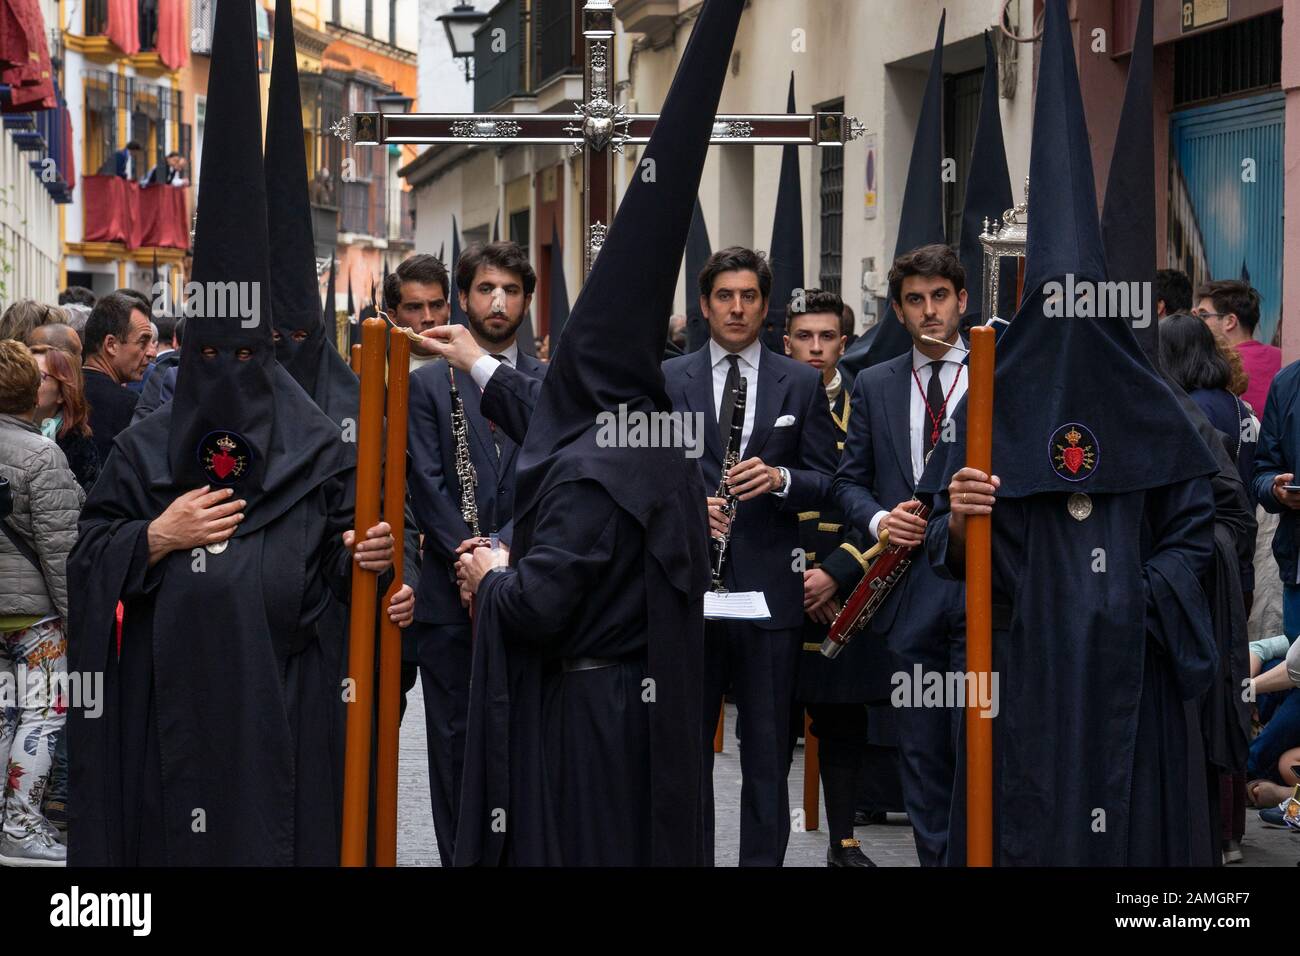 Semana santa , Easter religious parade event in Seville, Andalusia,spain Stock Photo